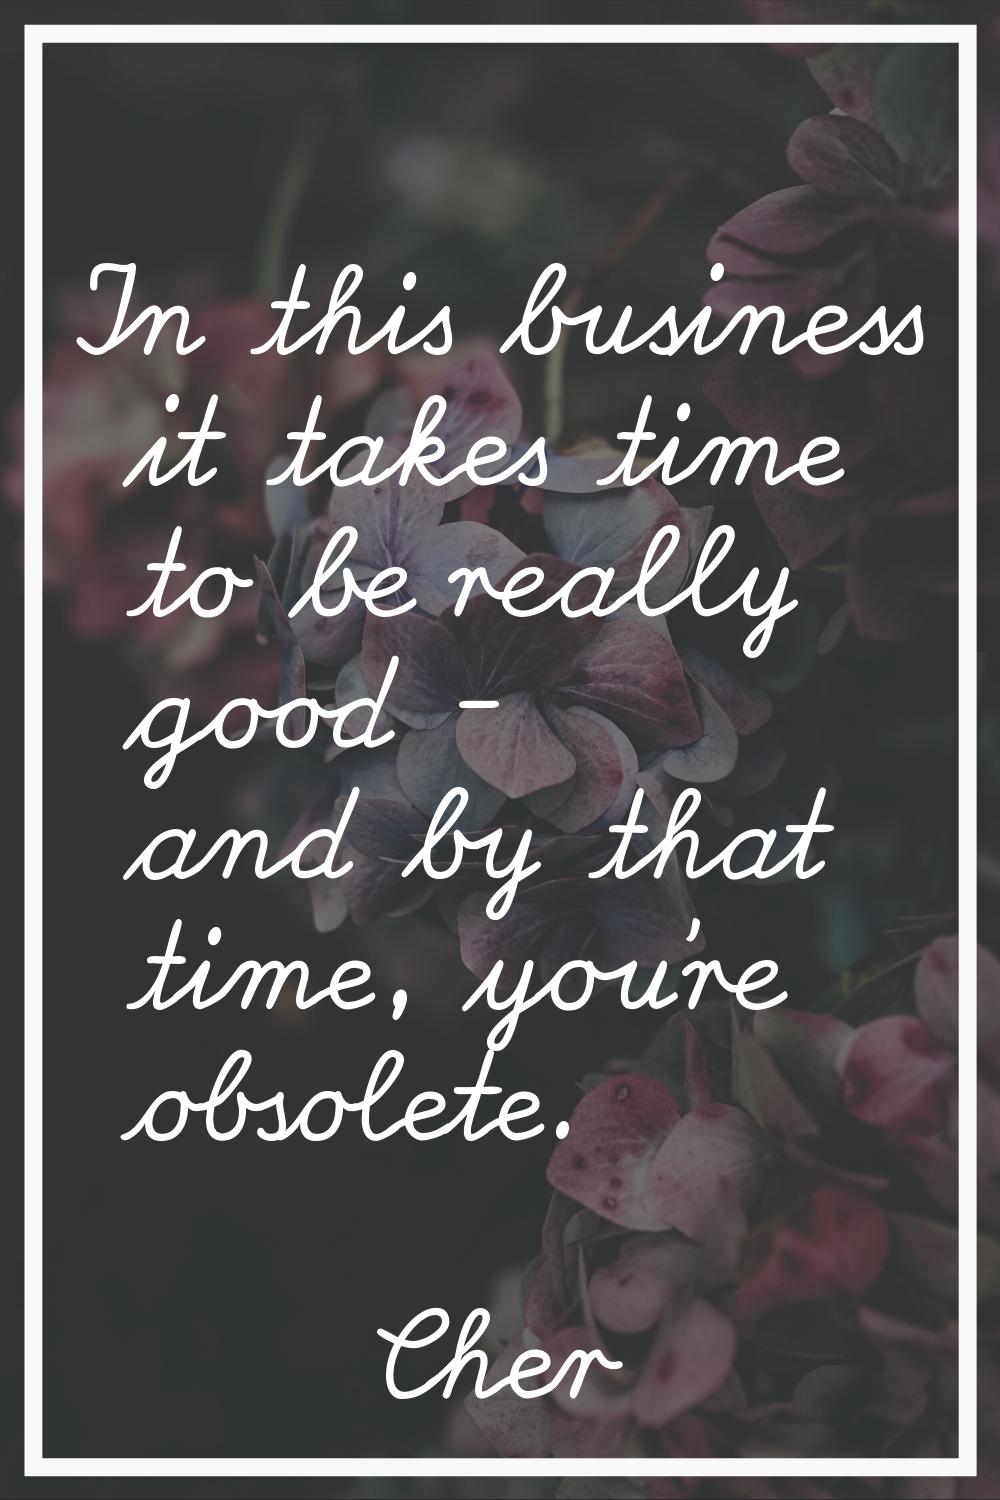 In this business it takes time to be really good - and by that time, you're obsolete.